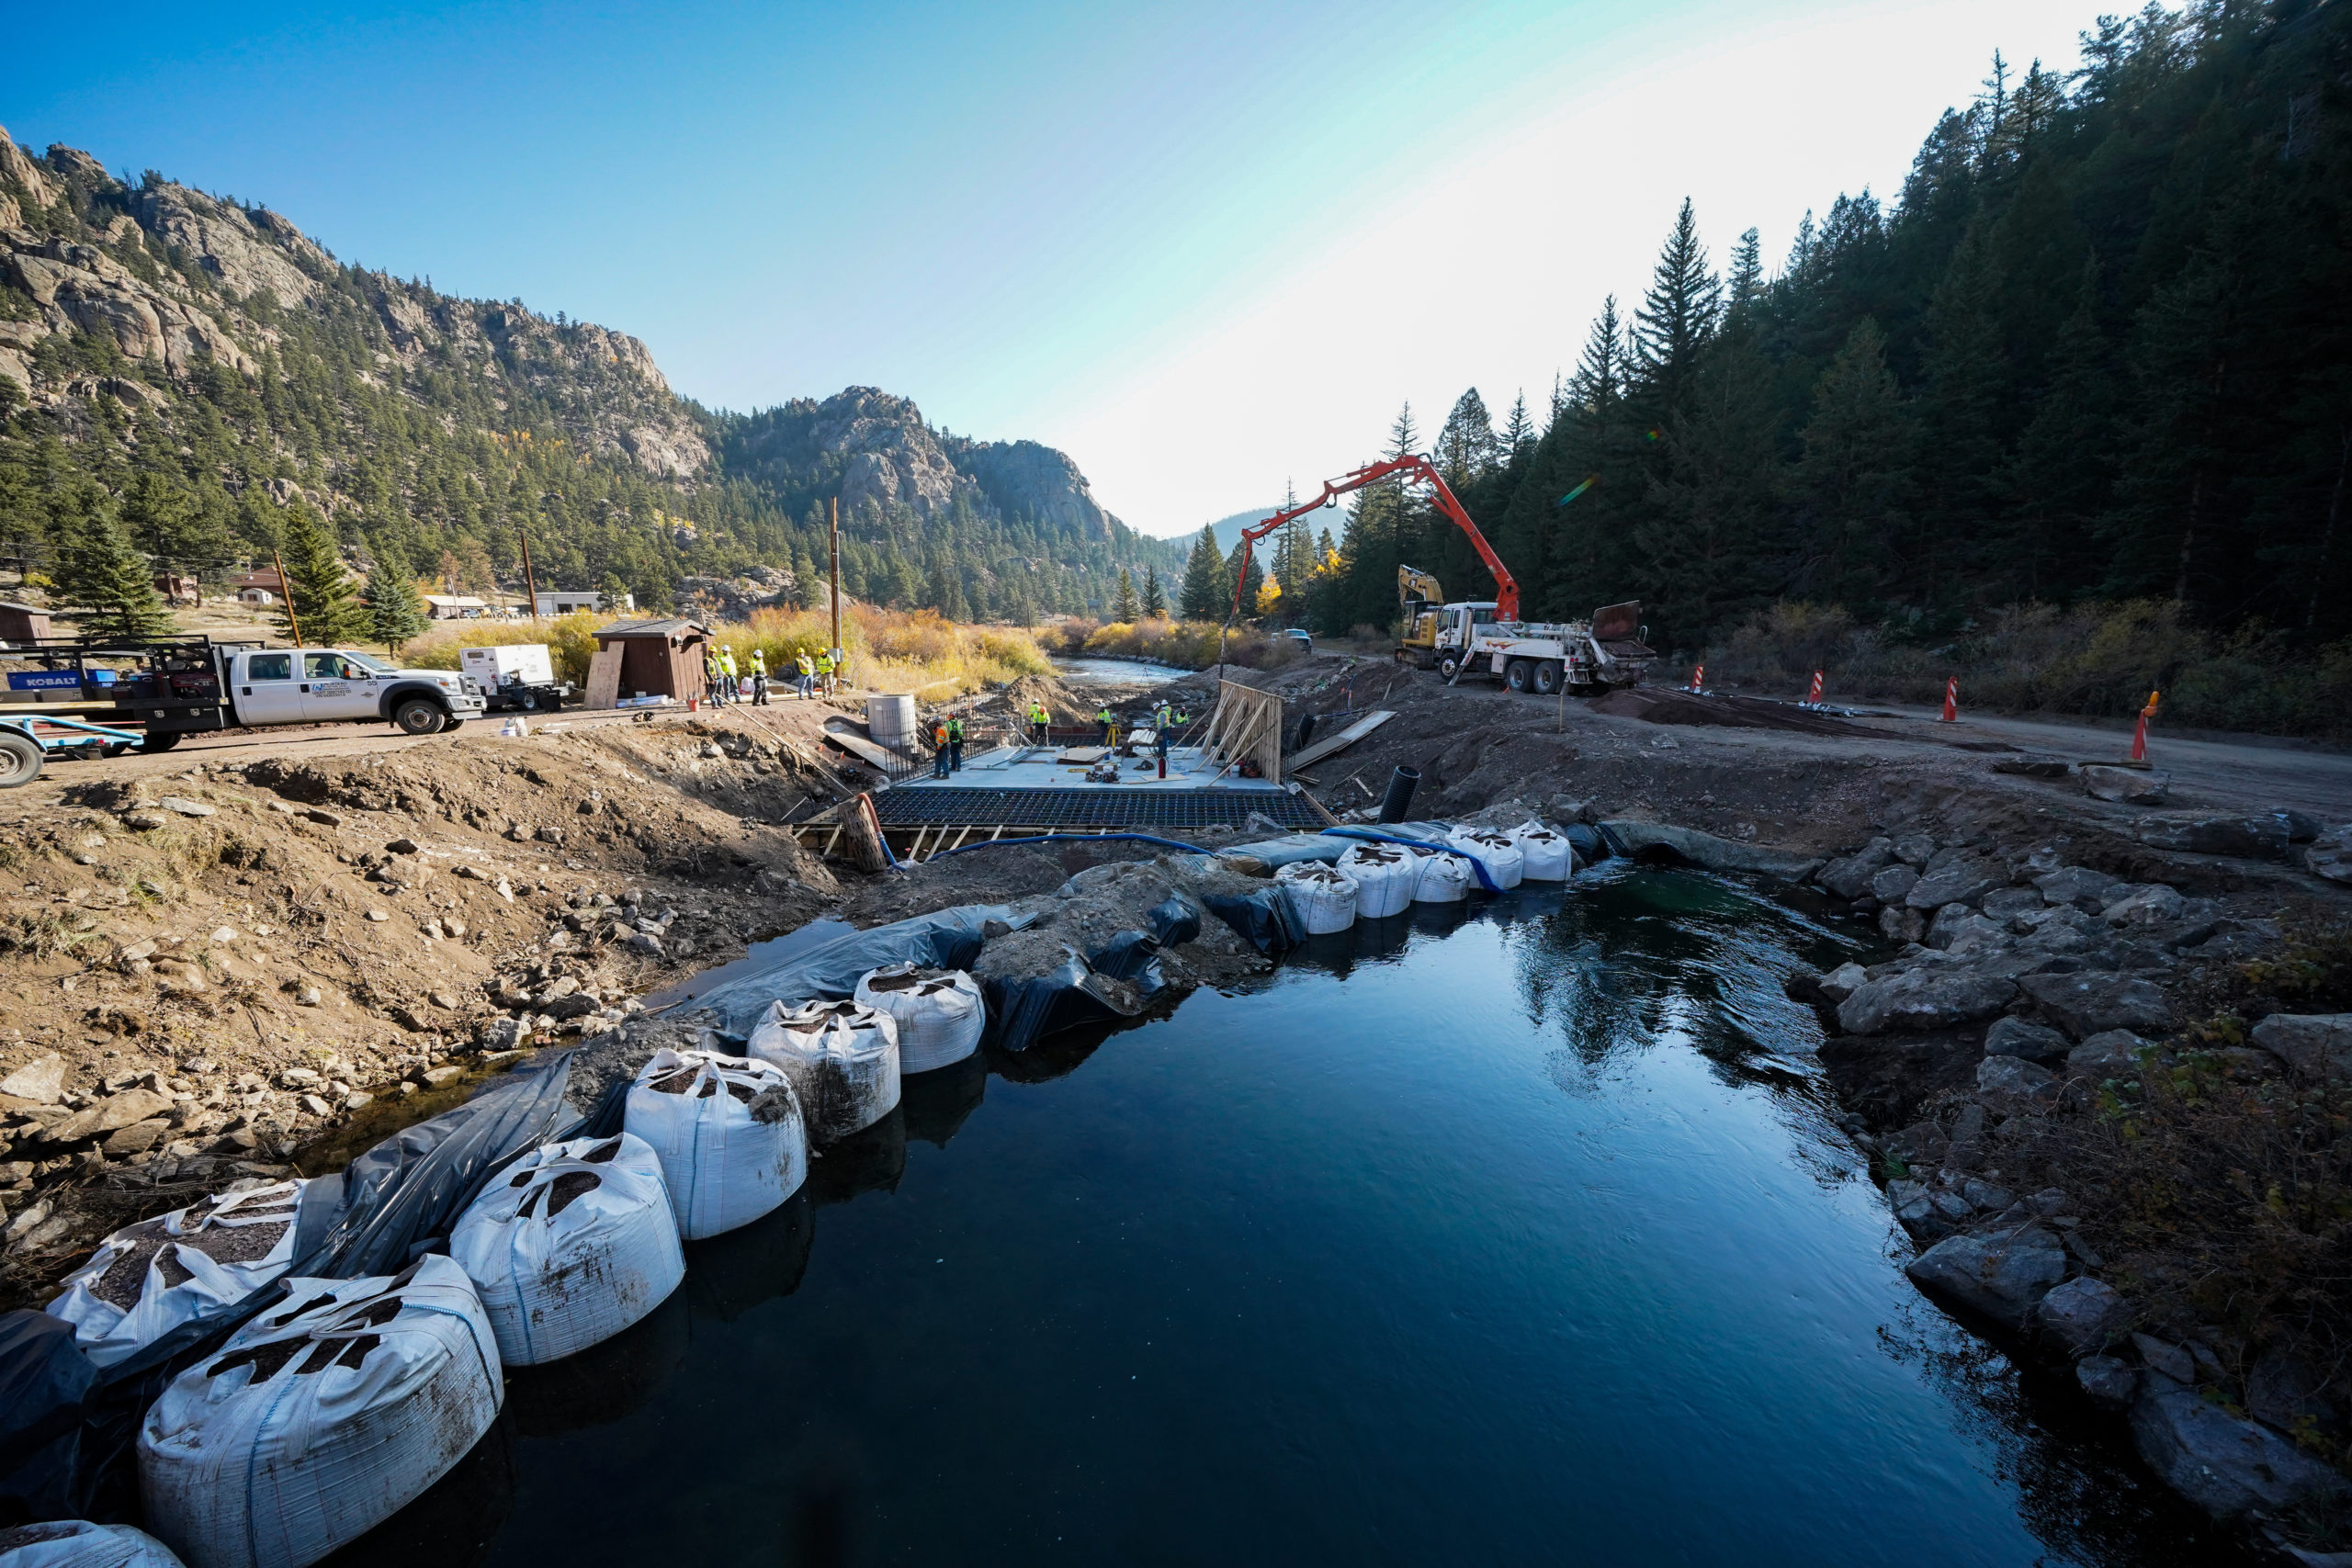 Workers built a temporary dam made of sandbags to divert water around the work area. Photo credit: Denver Water.